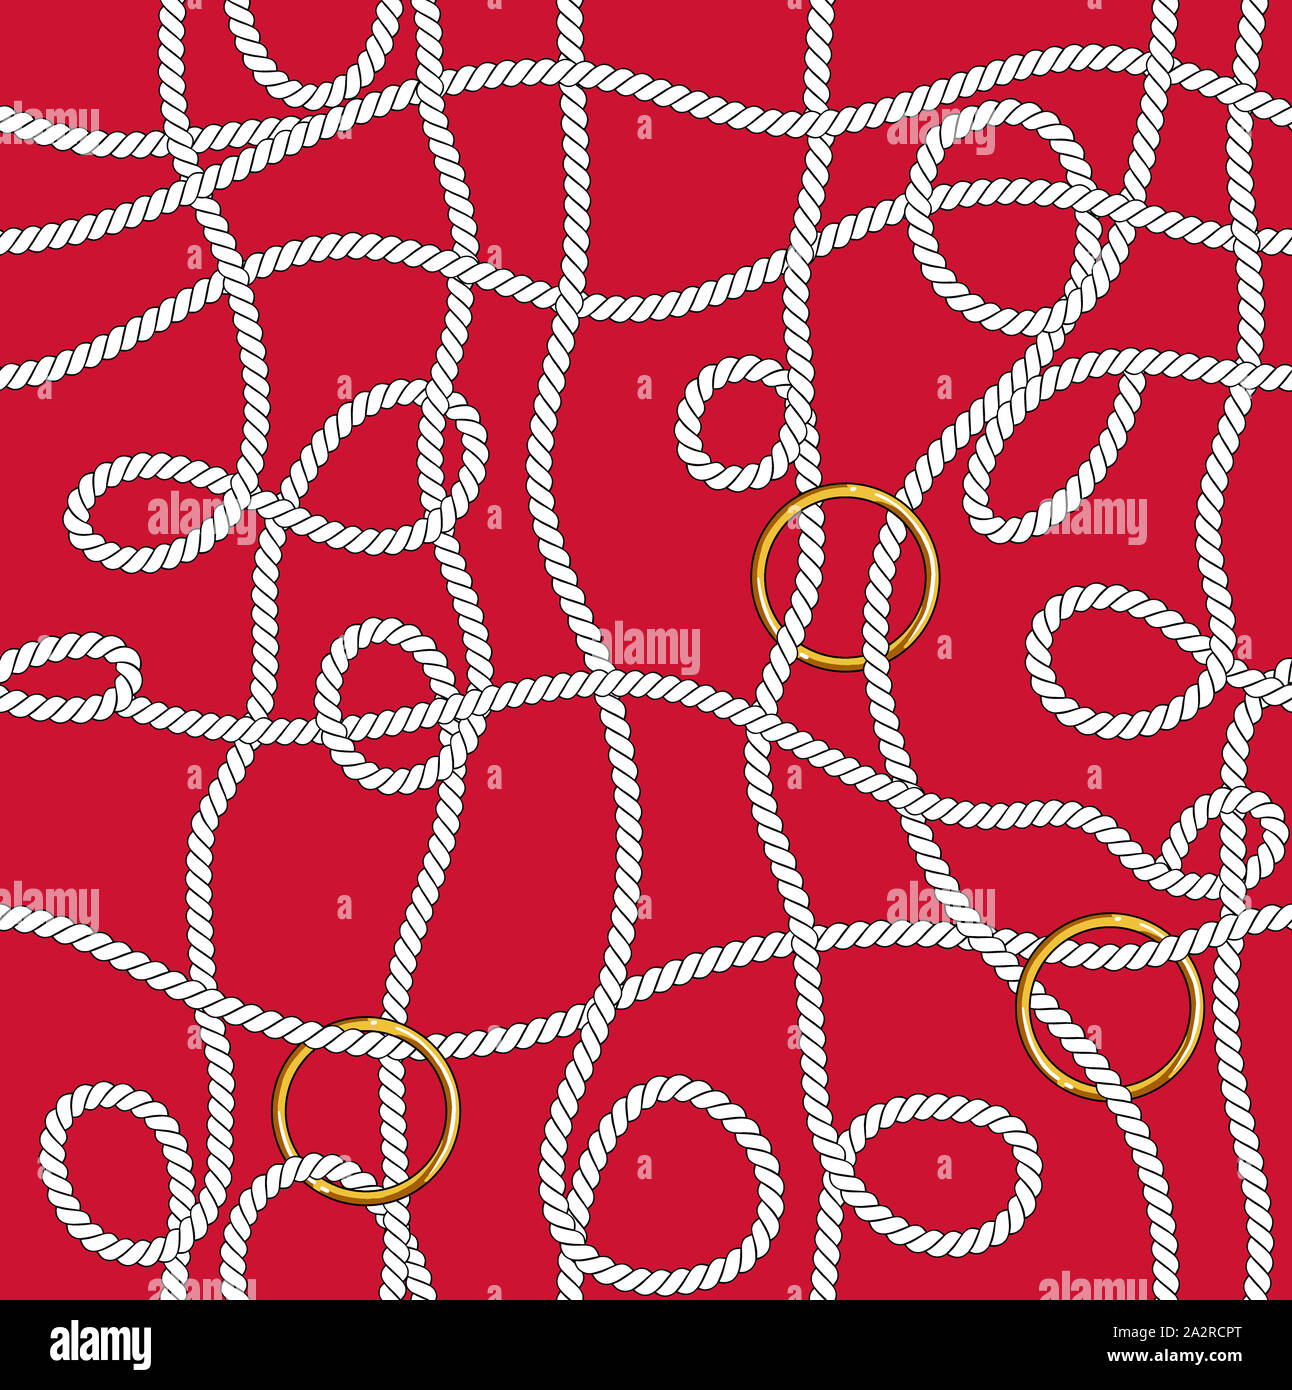 Seamless marine rope knot pattern. Endless illustration with white rope  ornament and nautical knots on red color background. Ready for textile  fabric Stock Photo - Alamy